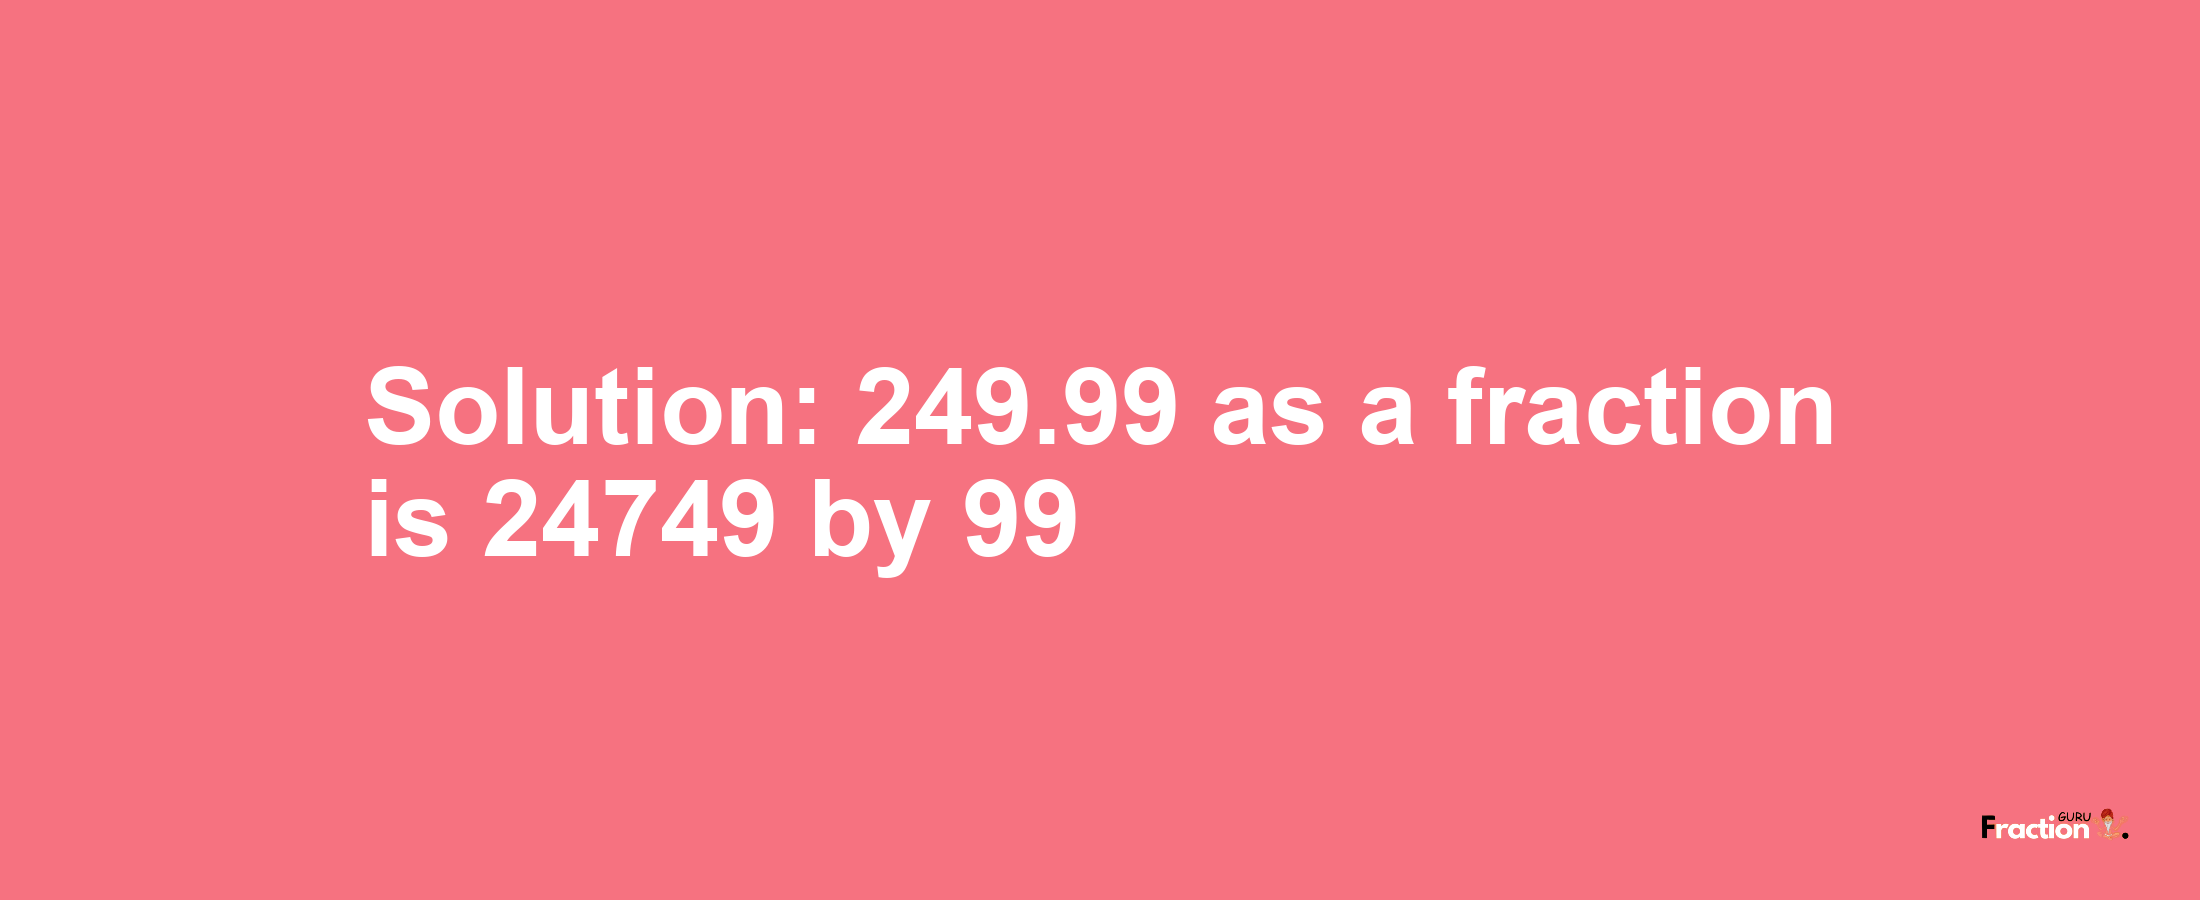 Solution:249.99 as a fraction is 24749/99